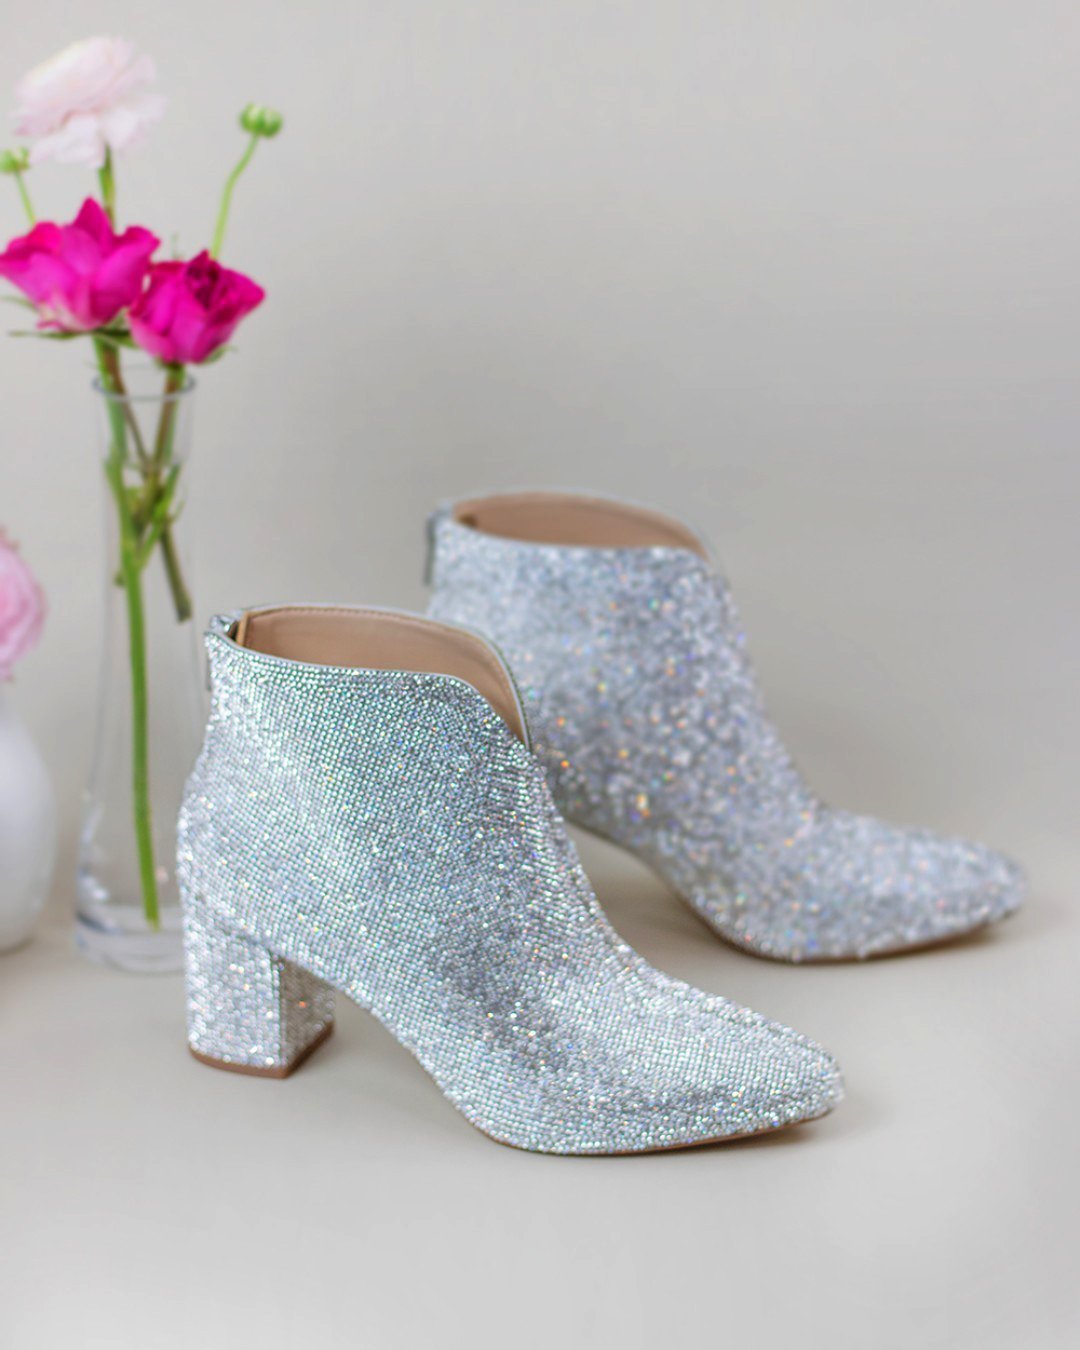 silver wedding shoes low heel boots sparkly katewhitcombshoes